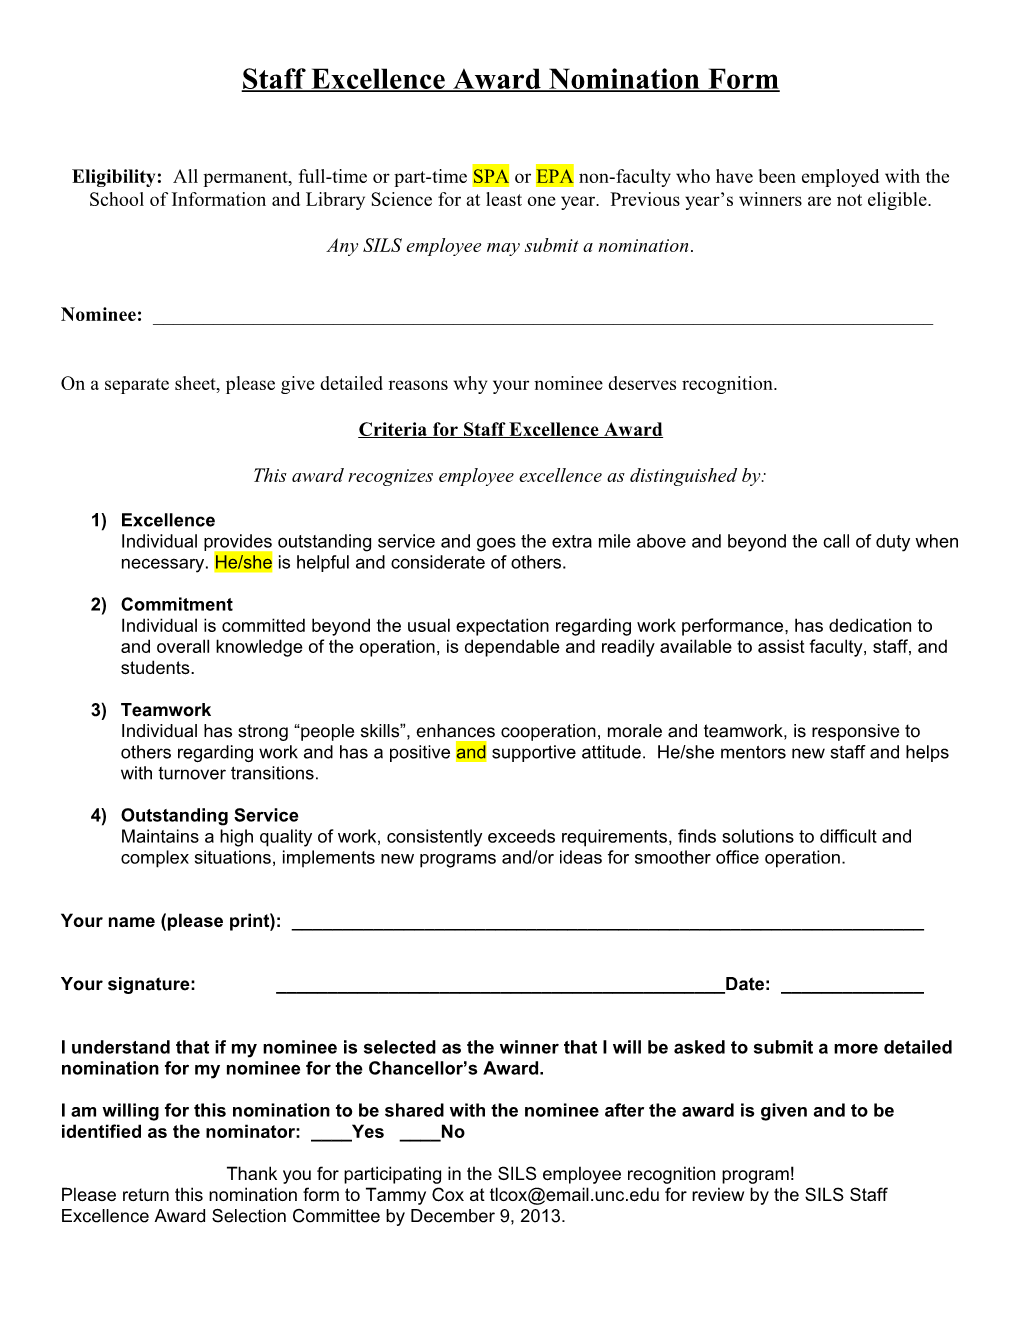 Staff Excellence Award Nomination Form